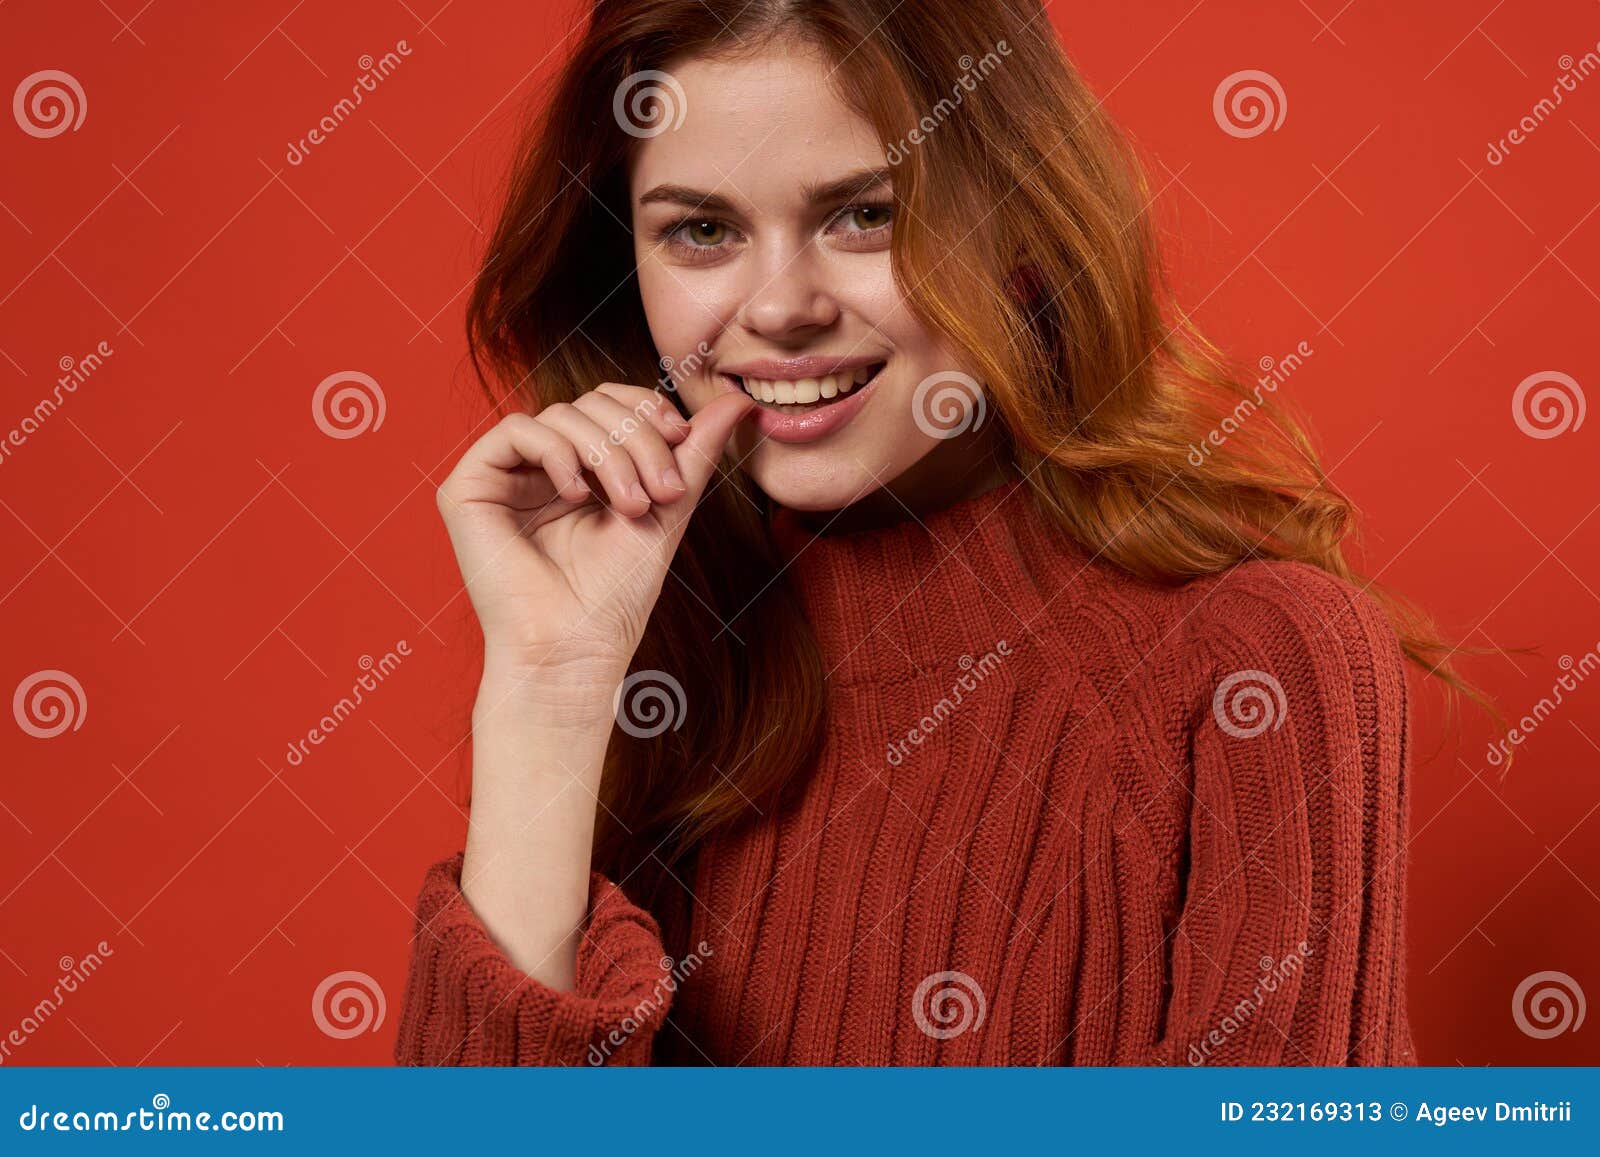 Woman in Red Sweater Clean Skin Hairstyle Fashion Studio Stock Image ...